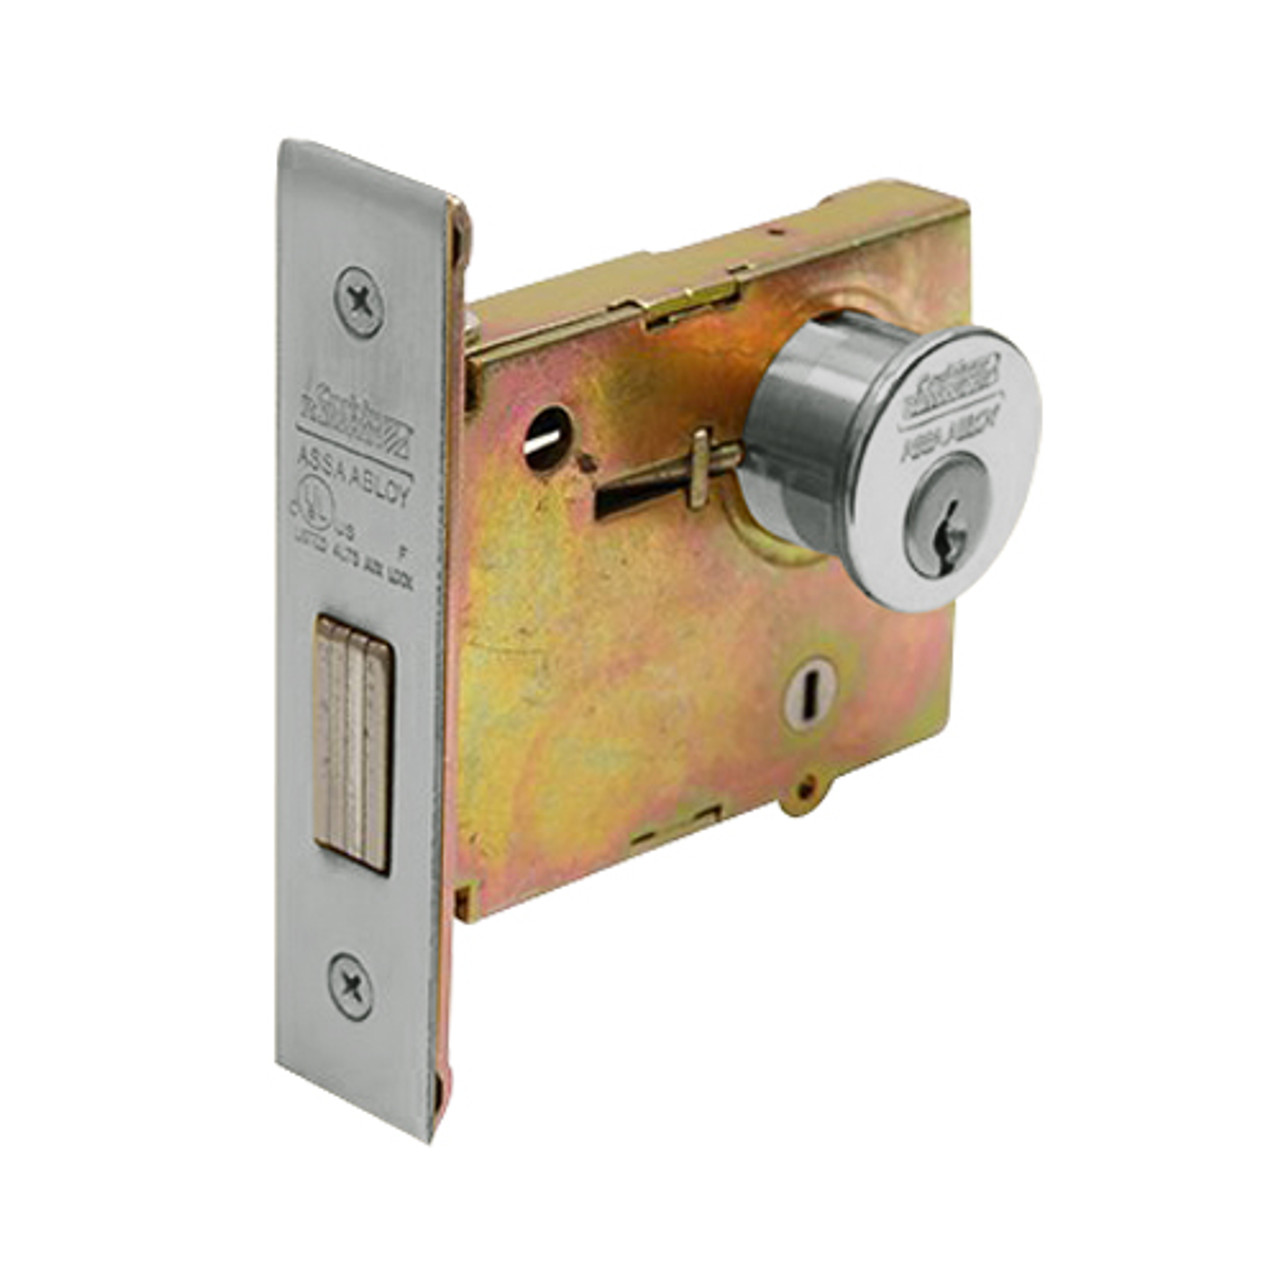 DL4112-619 Corbin DL4100 Series Mortise Deadlocks with Double Cylinder in Satin Nickel Finish